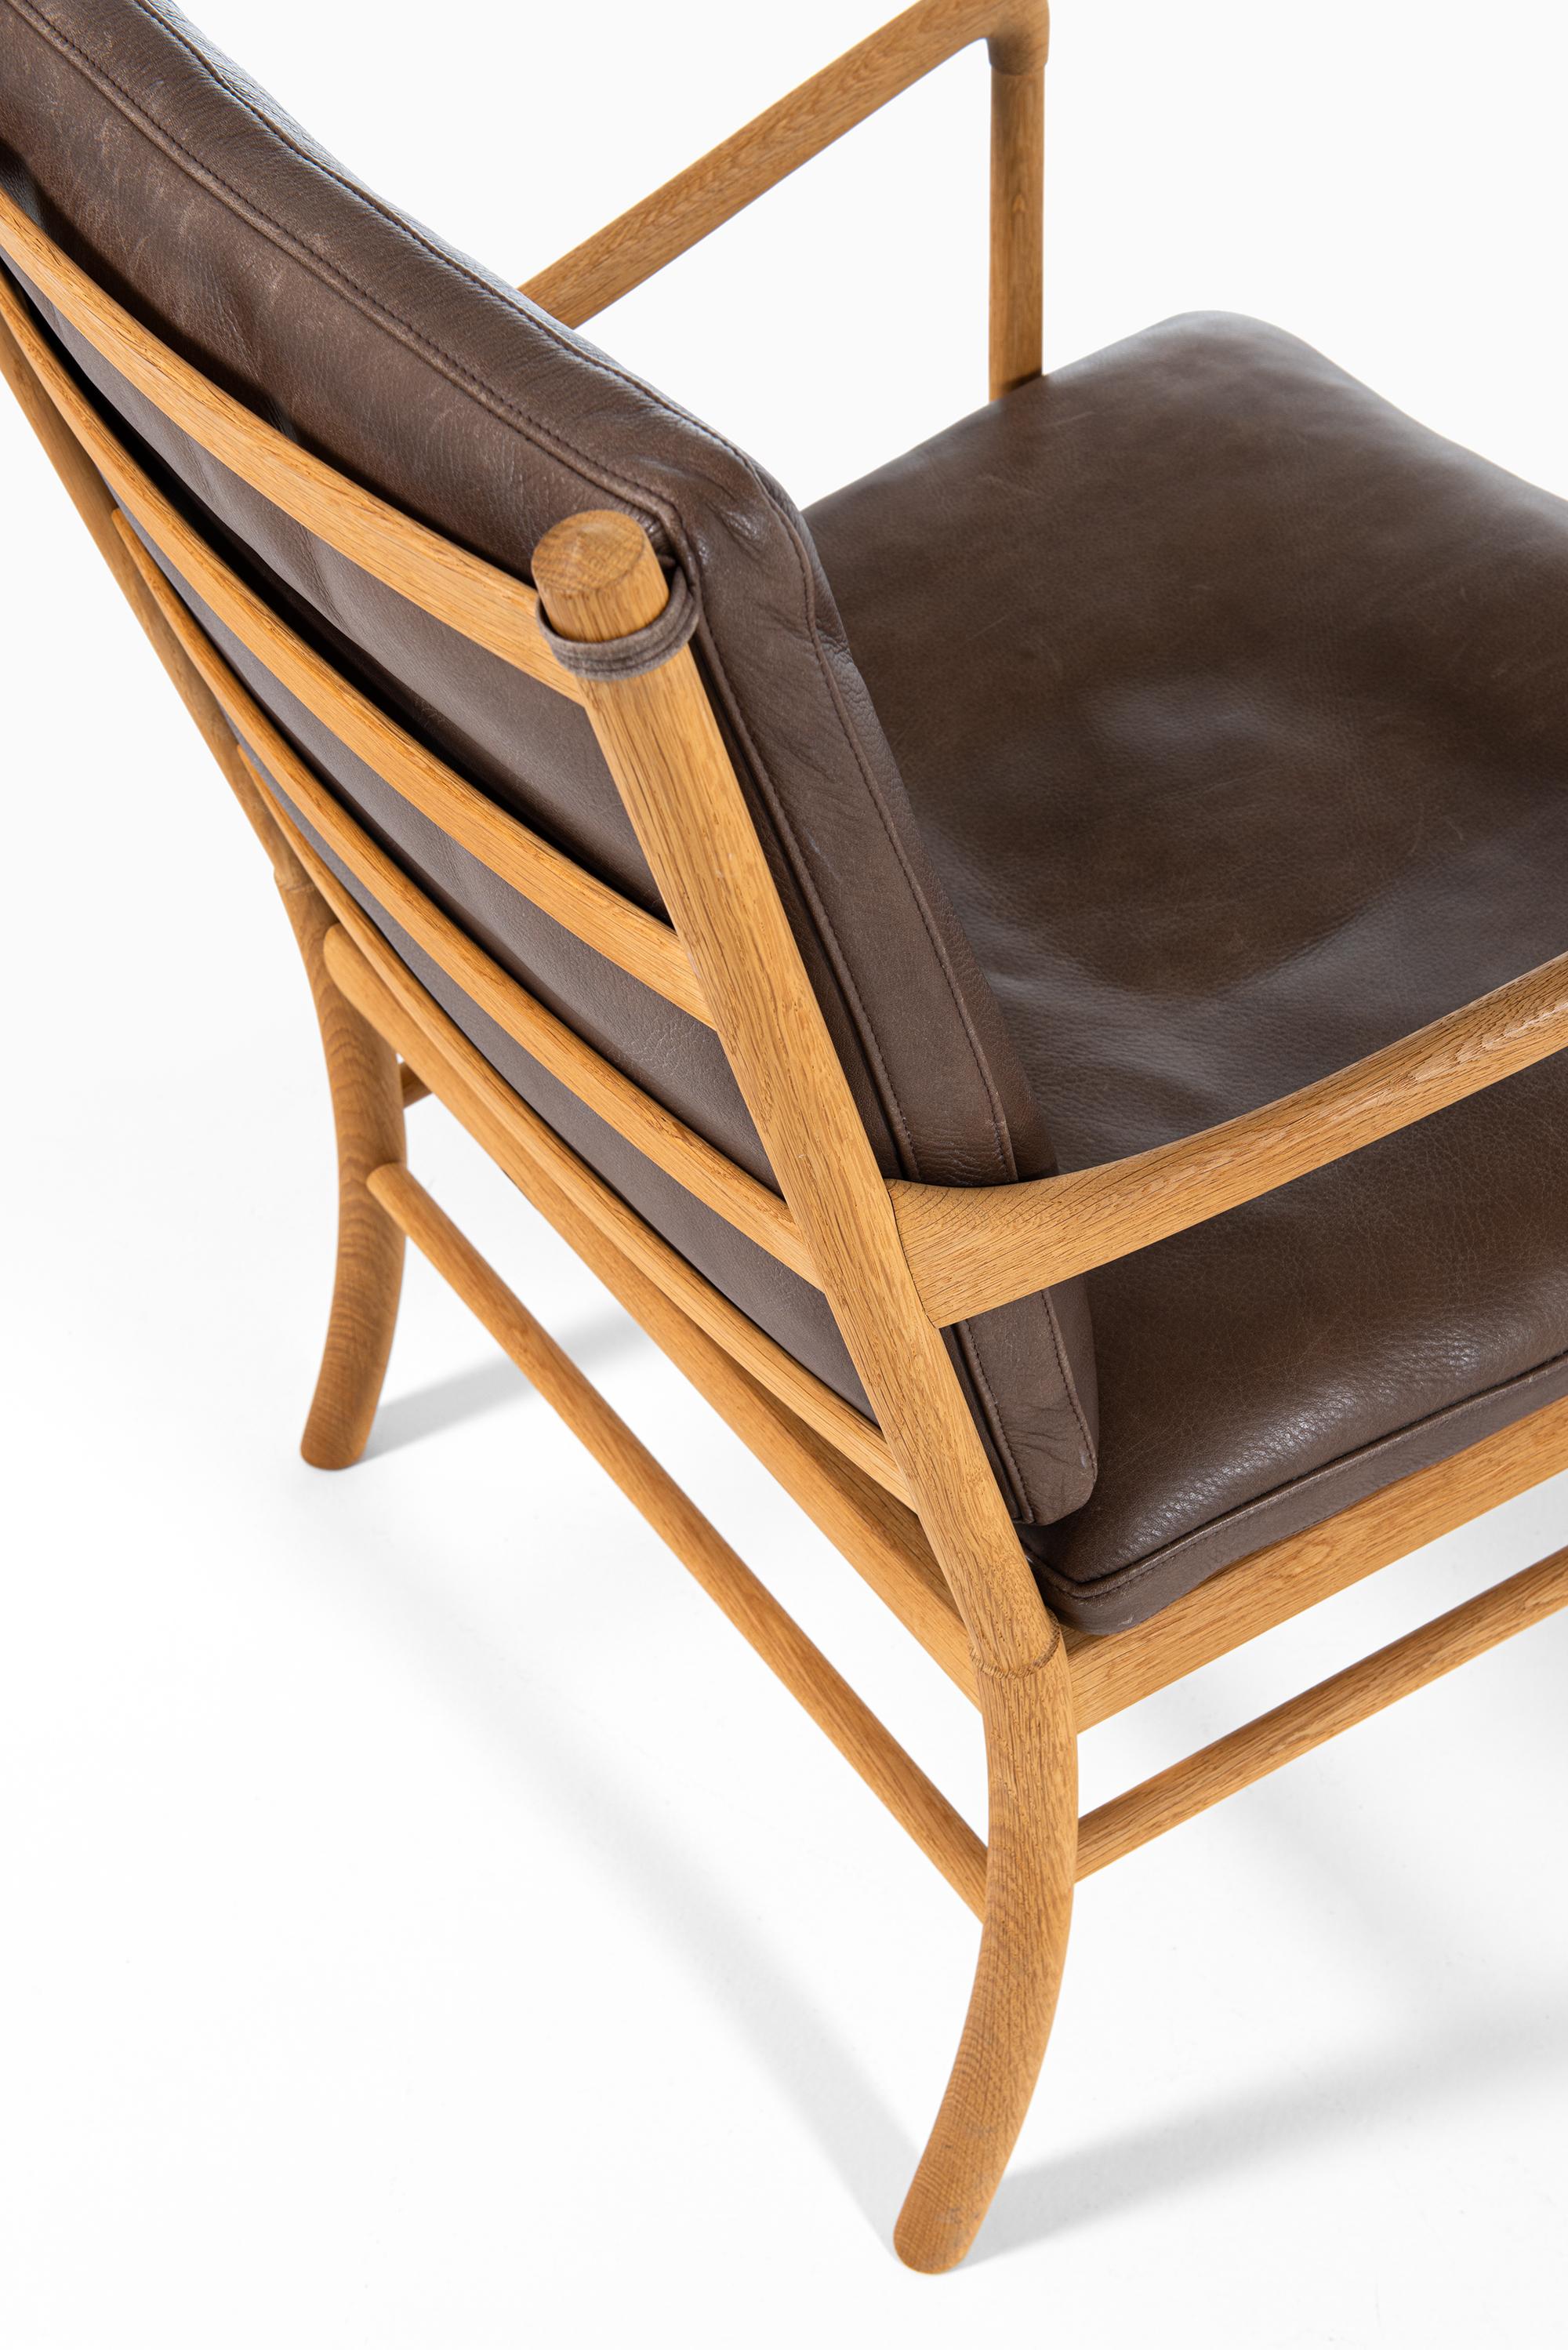 Leather Ole Wanscher Colonial Easy Chairs by P. Jeppesen Møbelfabrik in Denmark